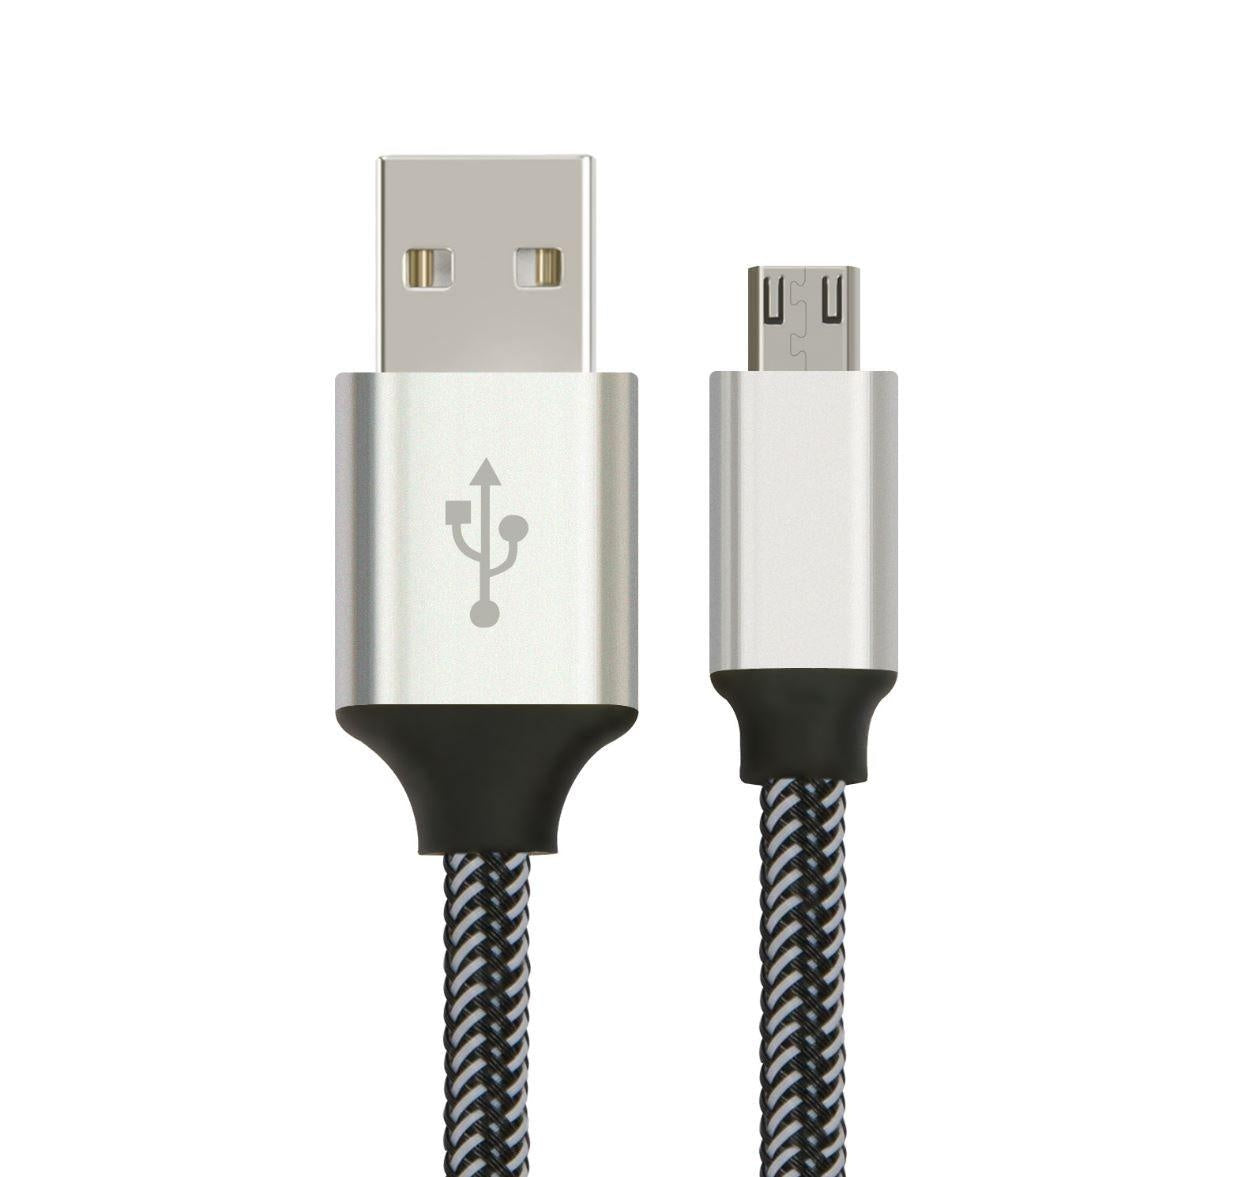 ASTROTEK 3m Micro USB Data Sync Charger Cable Cord Silver White Color for Samsung HTC Motorola Nokia Kndle Android Phone Tablet & Devices ASTROTEK